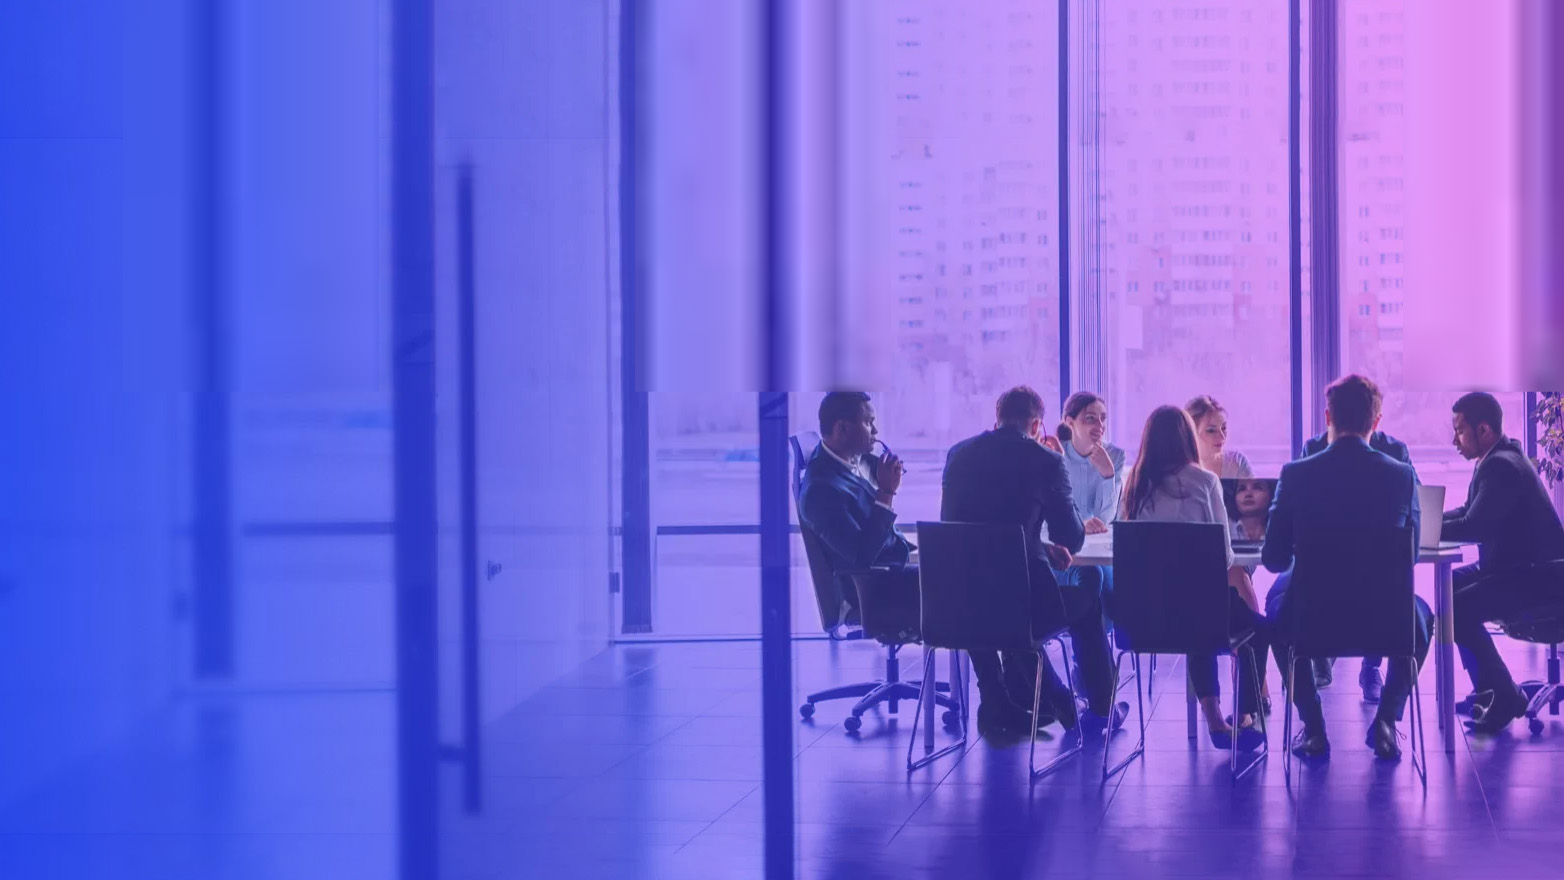 Group of male and female professionals interact around a conference table. Purple overlay over image.